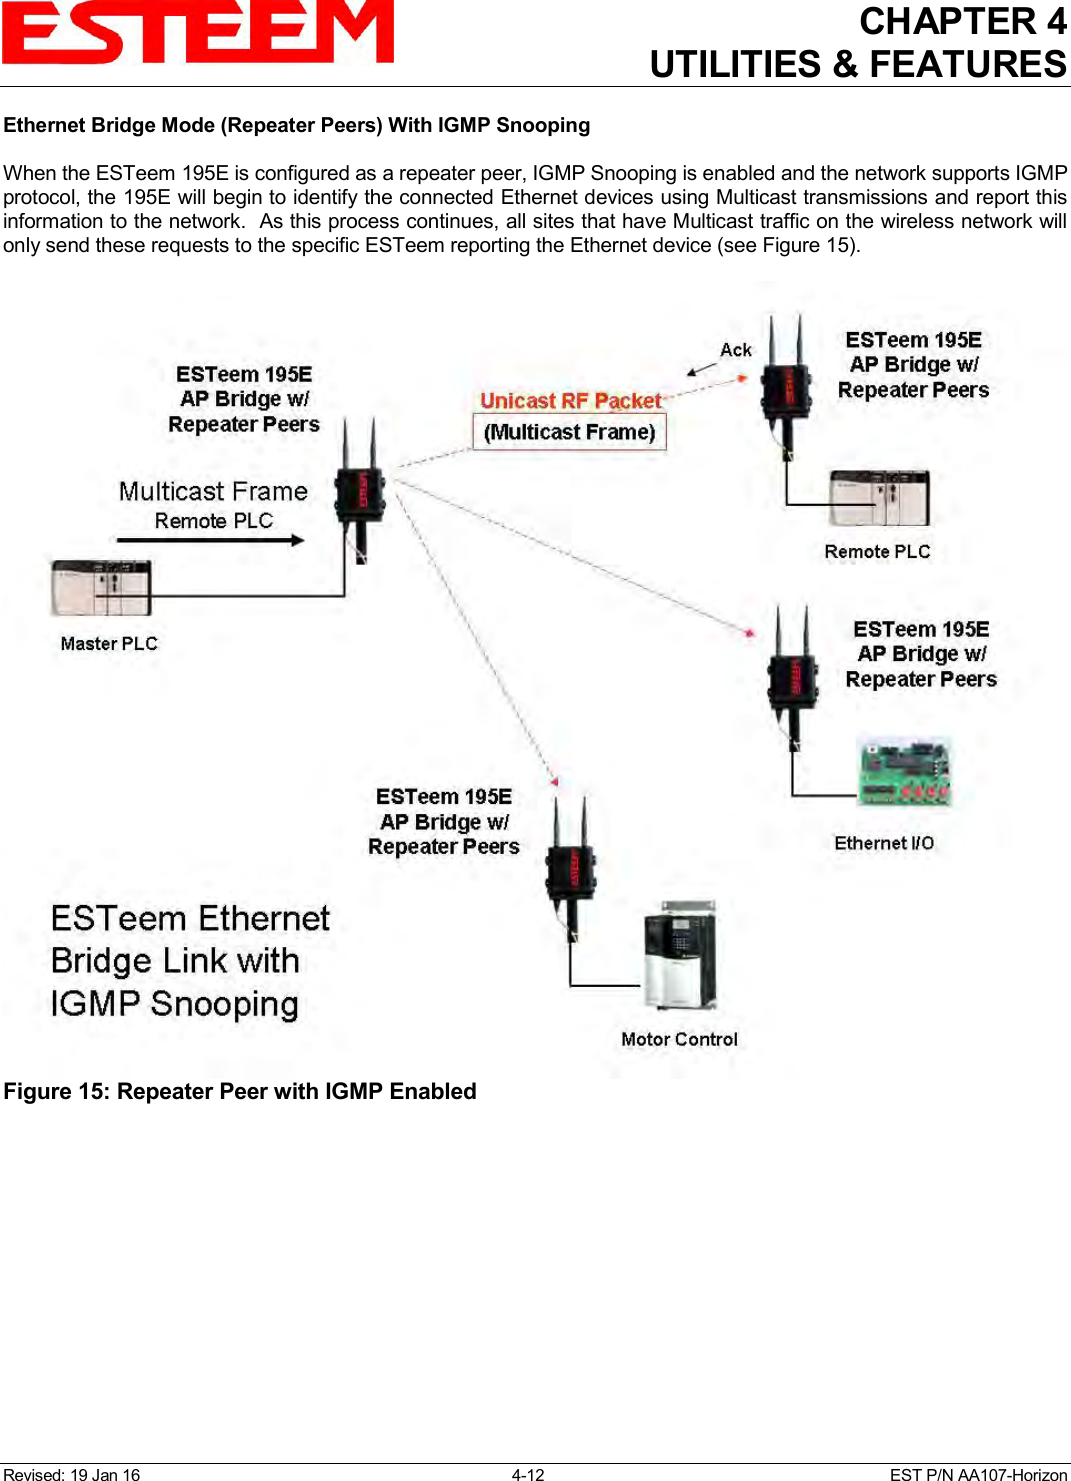 CHAPTER 4 UTILITIES &amp; FEATURES  Revised: 19 Jan 16  4-12  EST P/N AA107-Horizon Ethernet Bridge Mode (Repeater Peers) With IGMP Snooping  When the ESTeem 195E is configured as a repeater peer, IGMP Snooping is enabled and the network supports IGMP protocol, the 195E will begin to identify the connected Ethernet devices using Multicast transmissions and report this information to the network.  As this process continues, all sites that have Multicast traffic on the wireless network will only send these requests to the specific ESTeem reporting the Ethernet device (see Figure 15).   Figure 15: Repeater Peer with IGMP Enabled  